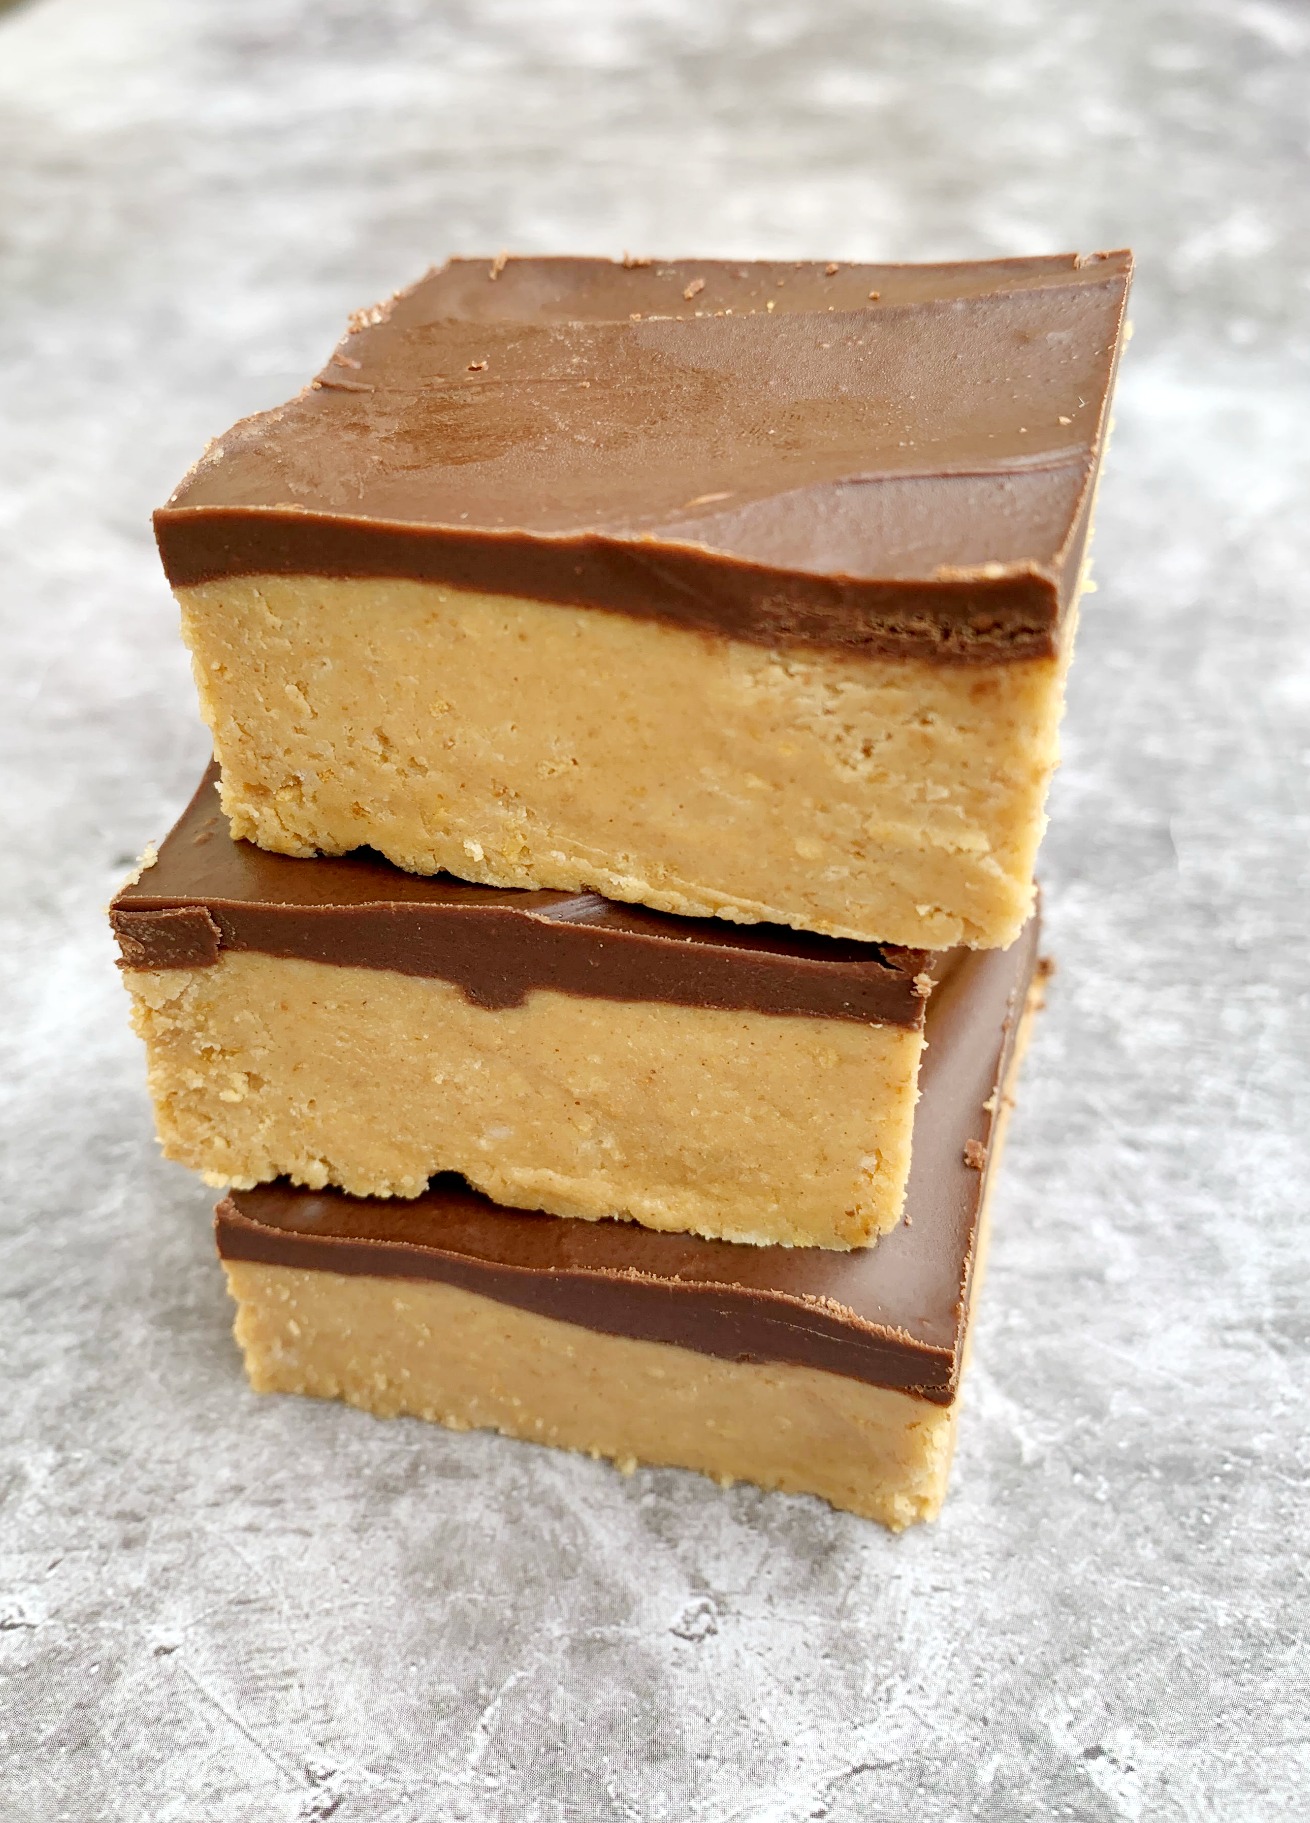 3 peanut butter chocolate bars stacked on top of each other